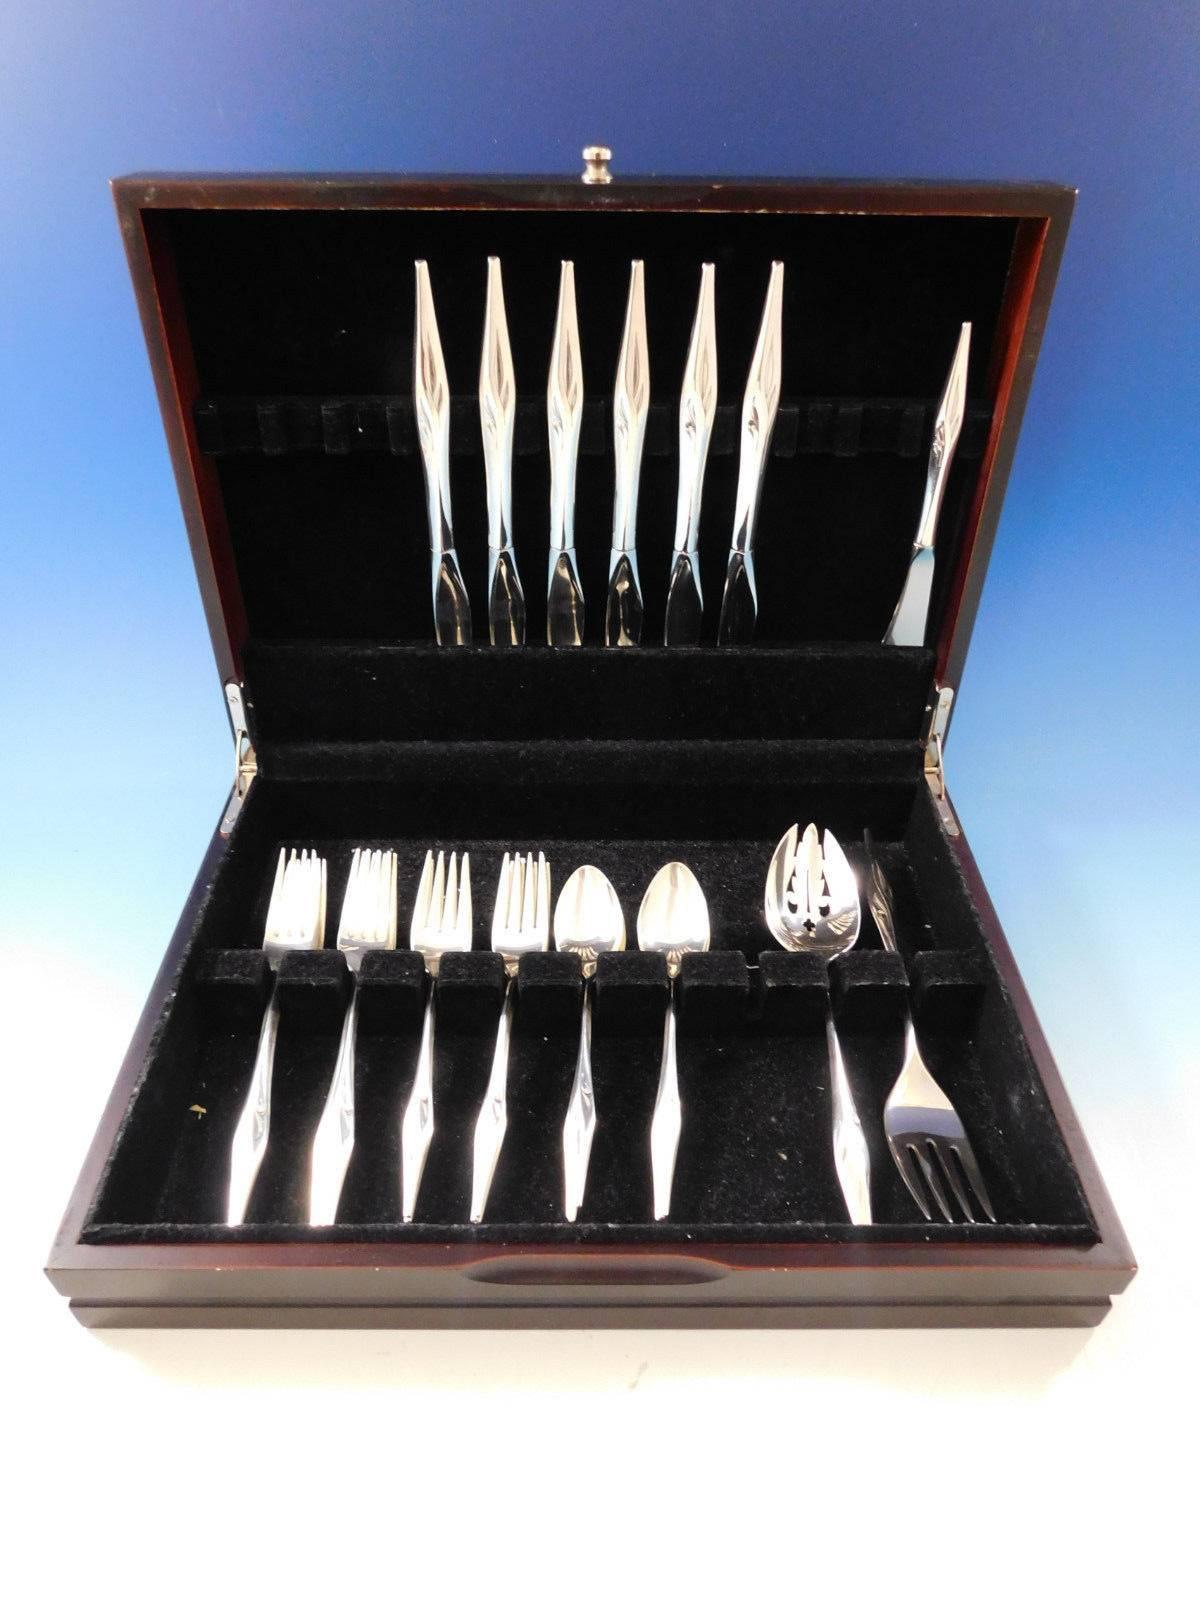 Still mood by Wallace sterling silver flatware set of 27 pieces. Great starter set! This set includes:

Six knives, 9 3/8